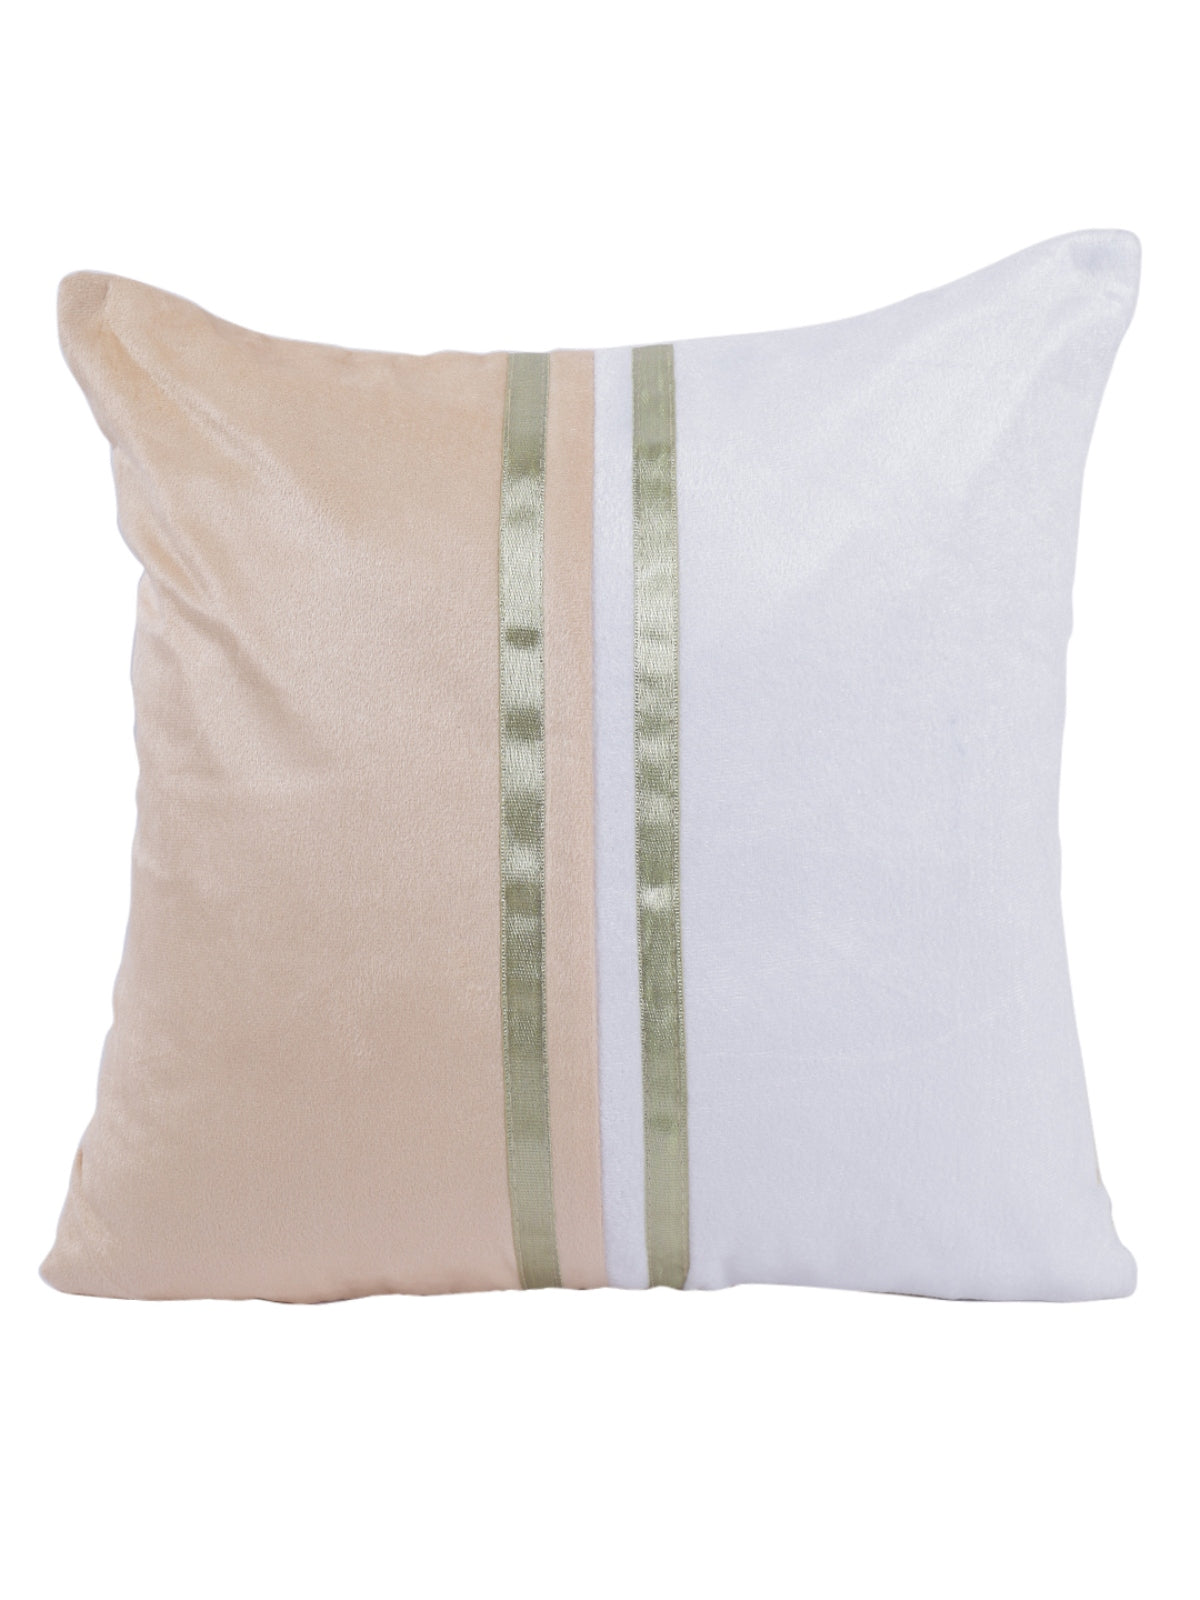 Beige & White Set of 5 Polyester 16 Inch x 16 Inch Cushion Covers